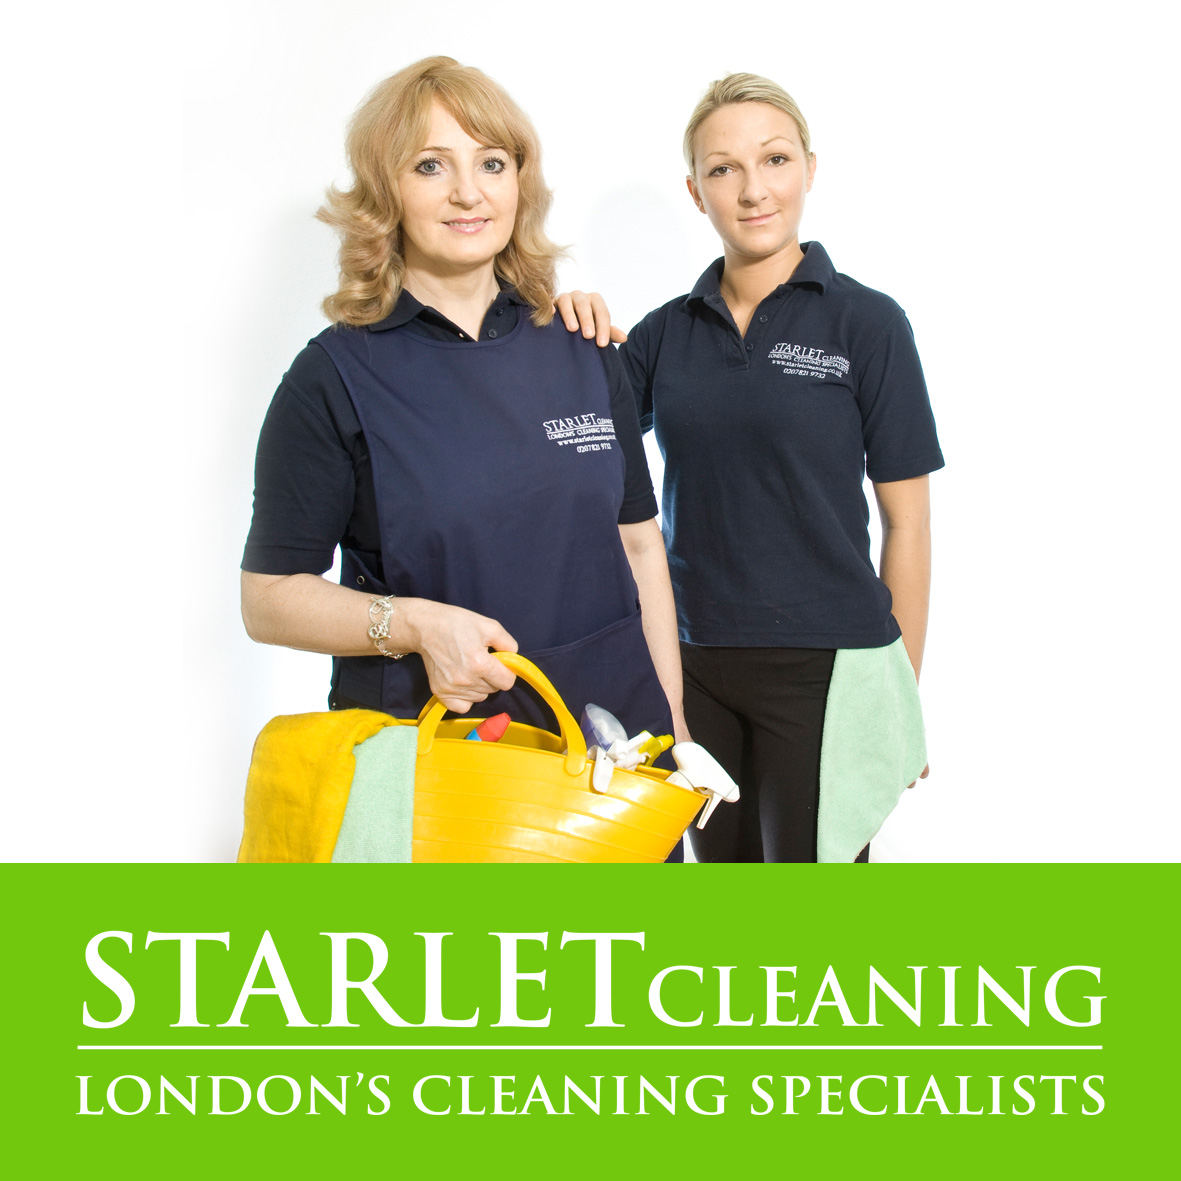 HOW MUCH DOES IT COST TO HIRE A CLEANER IN LONDON?